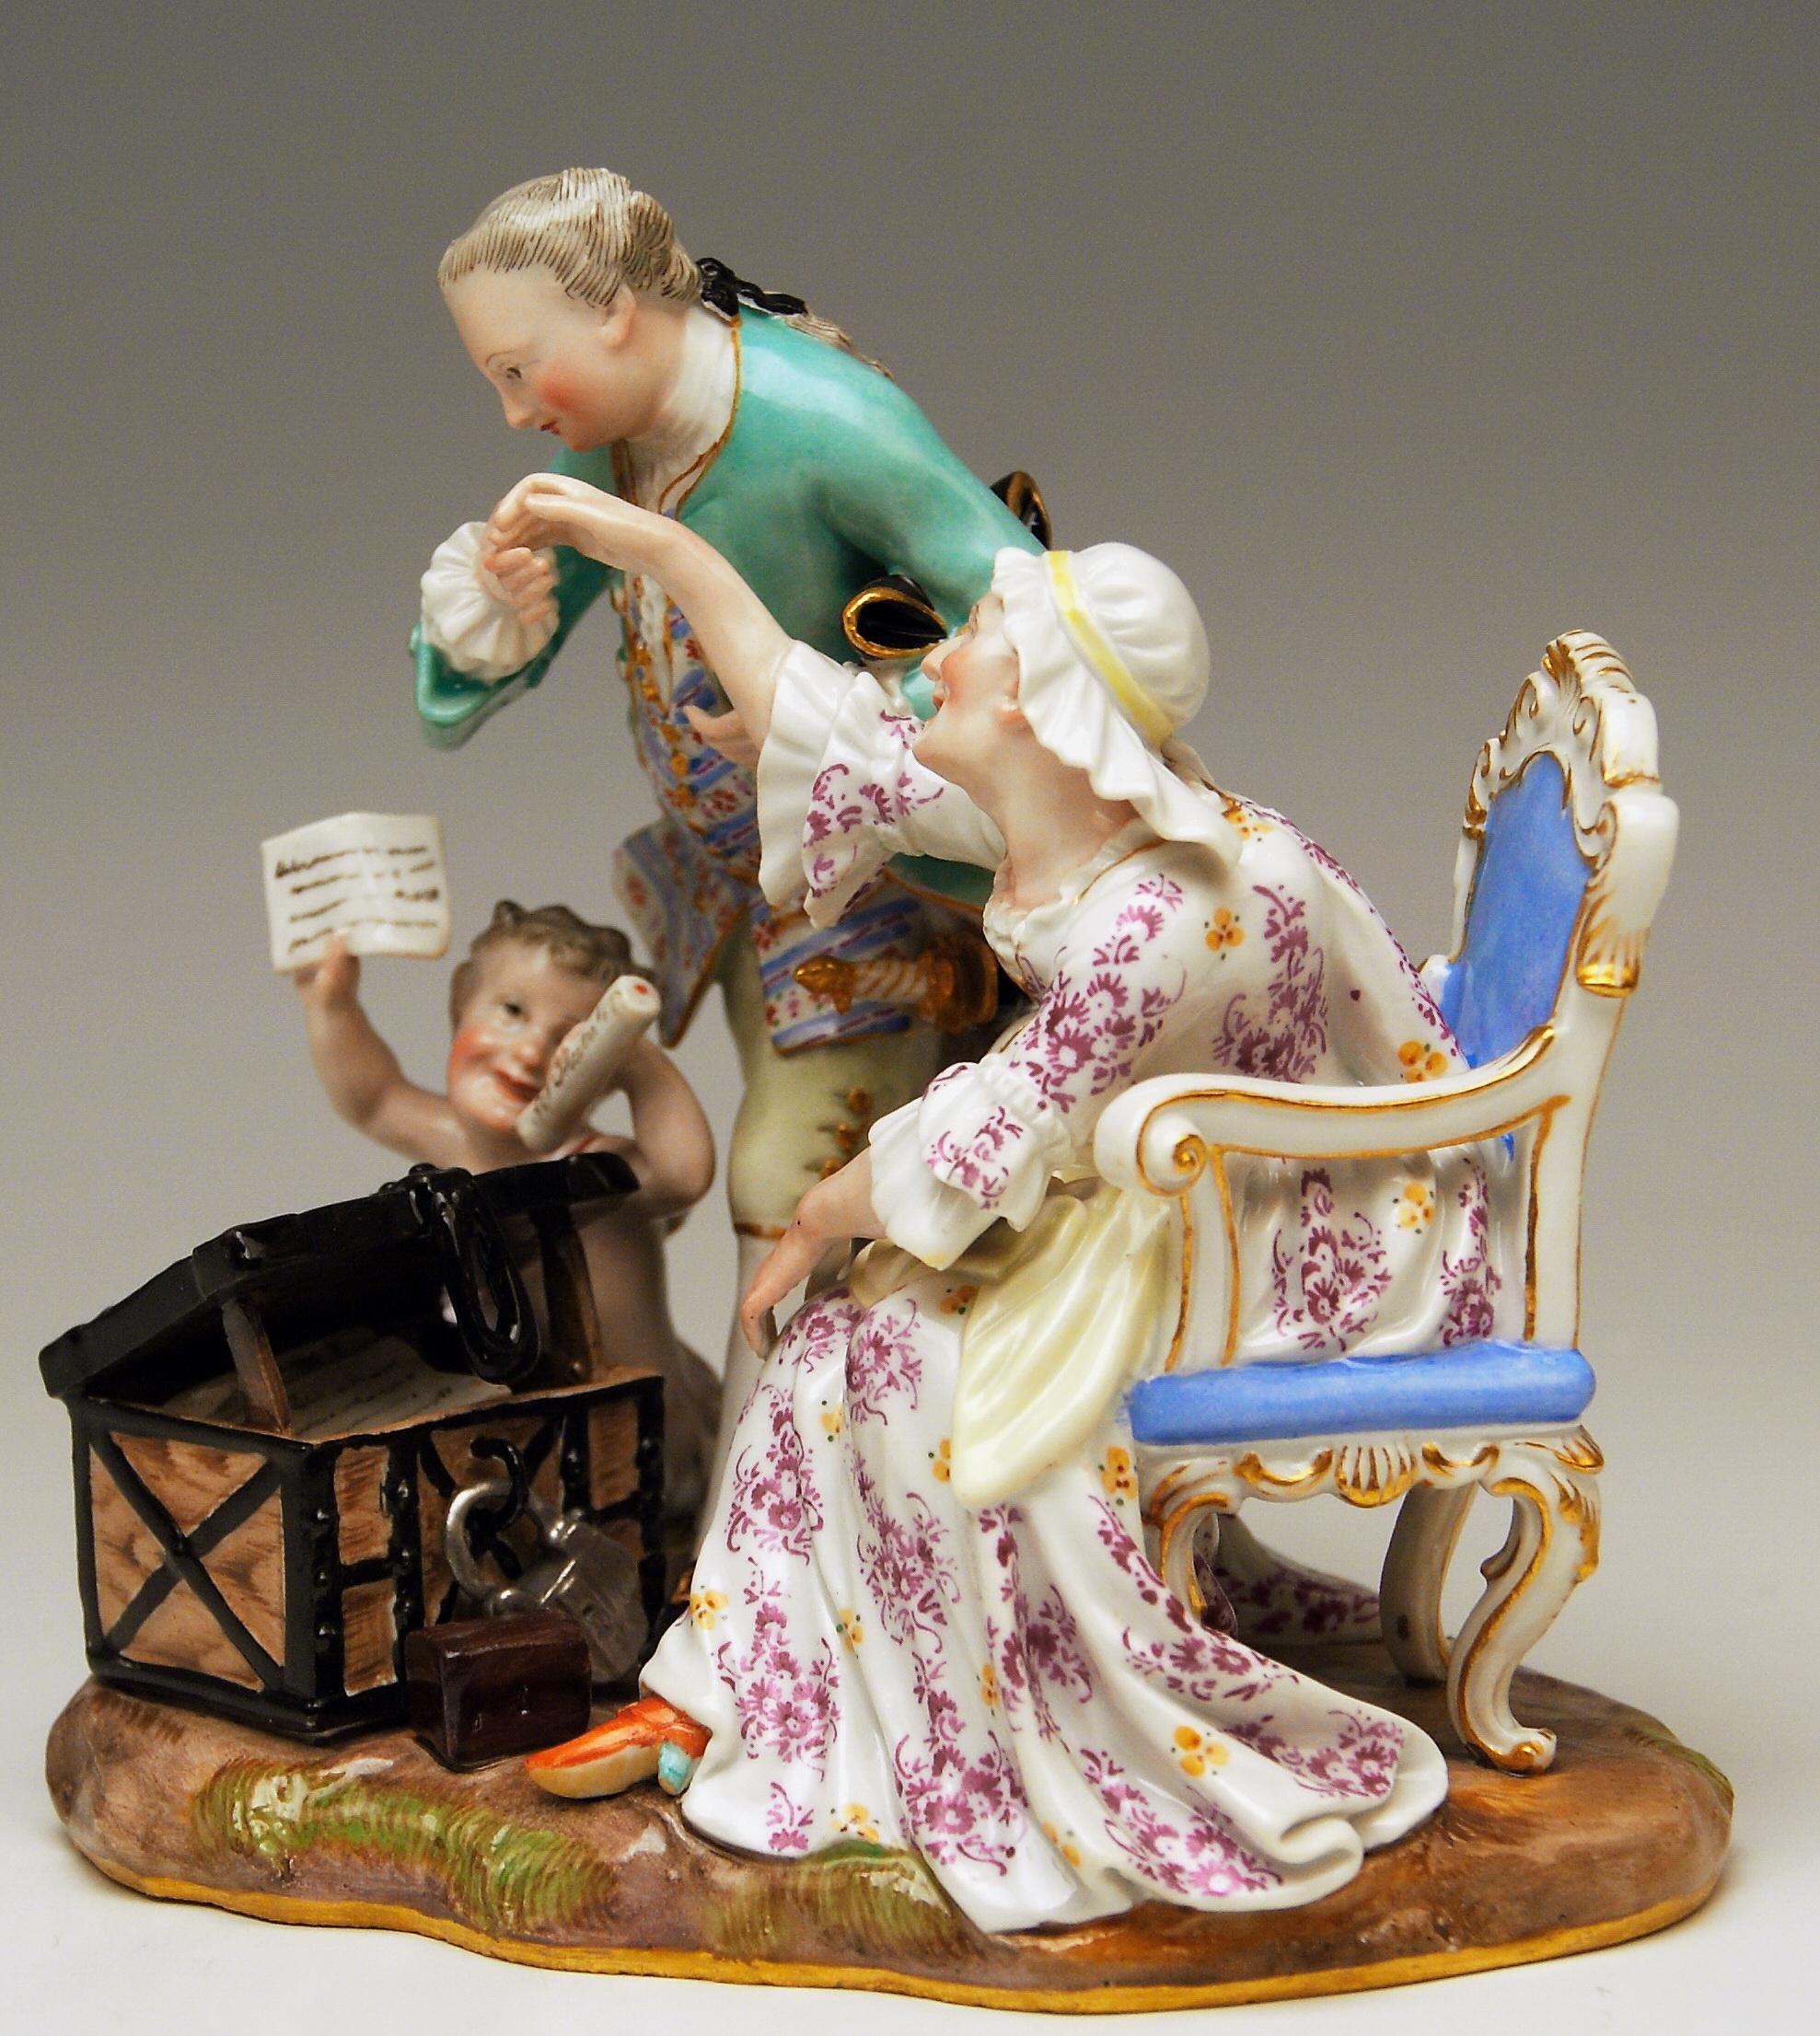 Meissen very interesting figurines' group: The Legacy Hunter or Ancient Love
The details are stunningly scupltured = finest modelling

Manufactory: Meissen 
Dating: made circa 1870
Hallmarked: Meissen Mark with Pommels on Hilts (19th